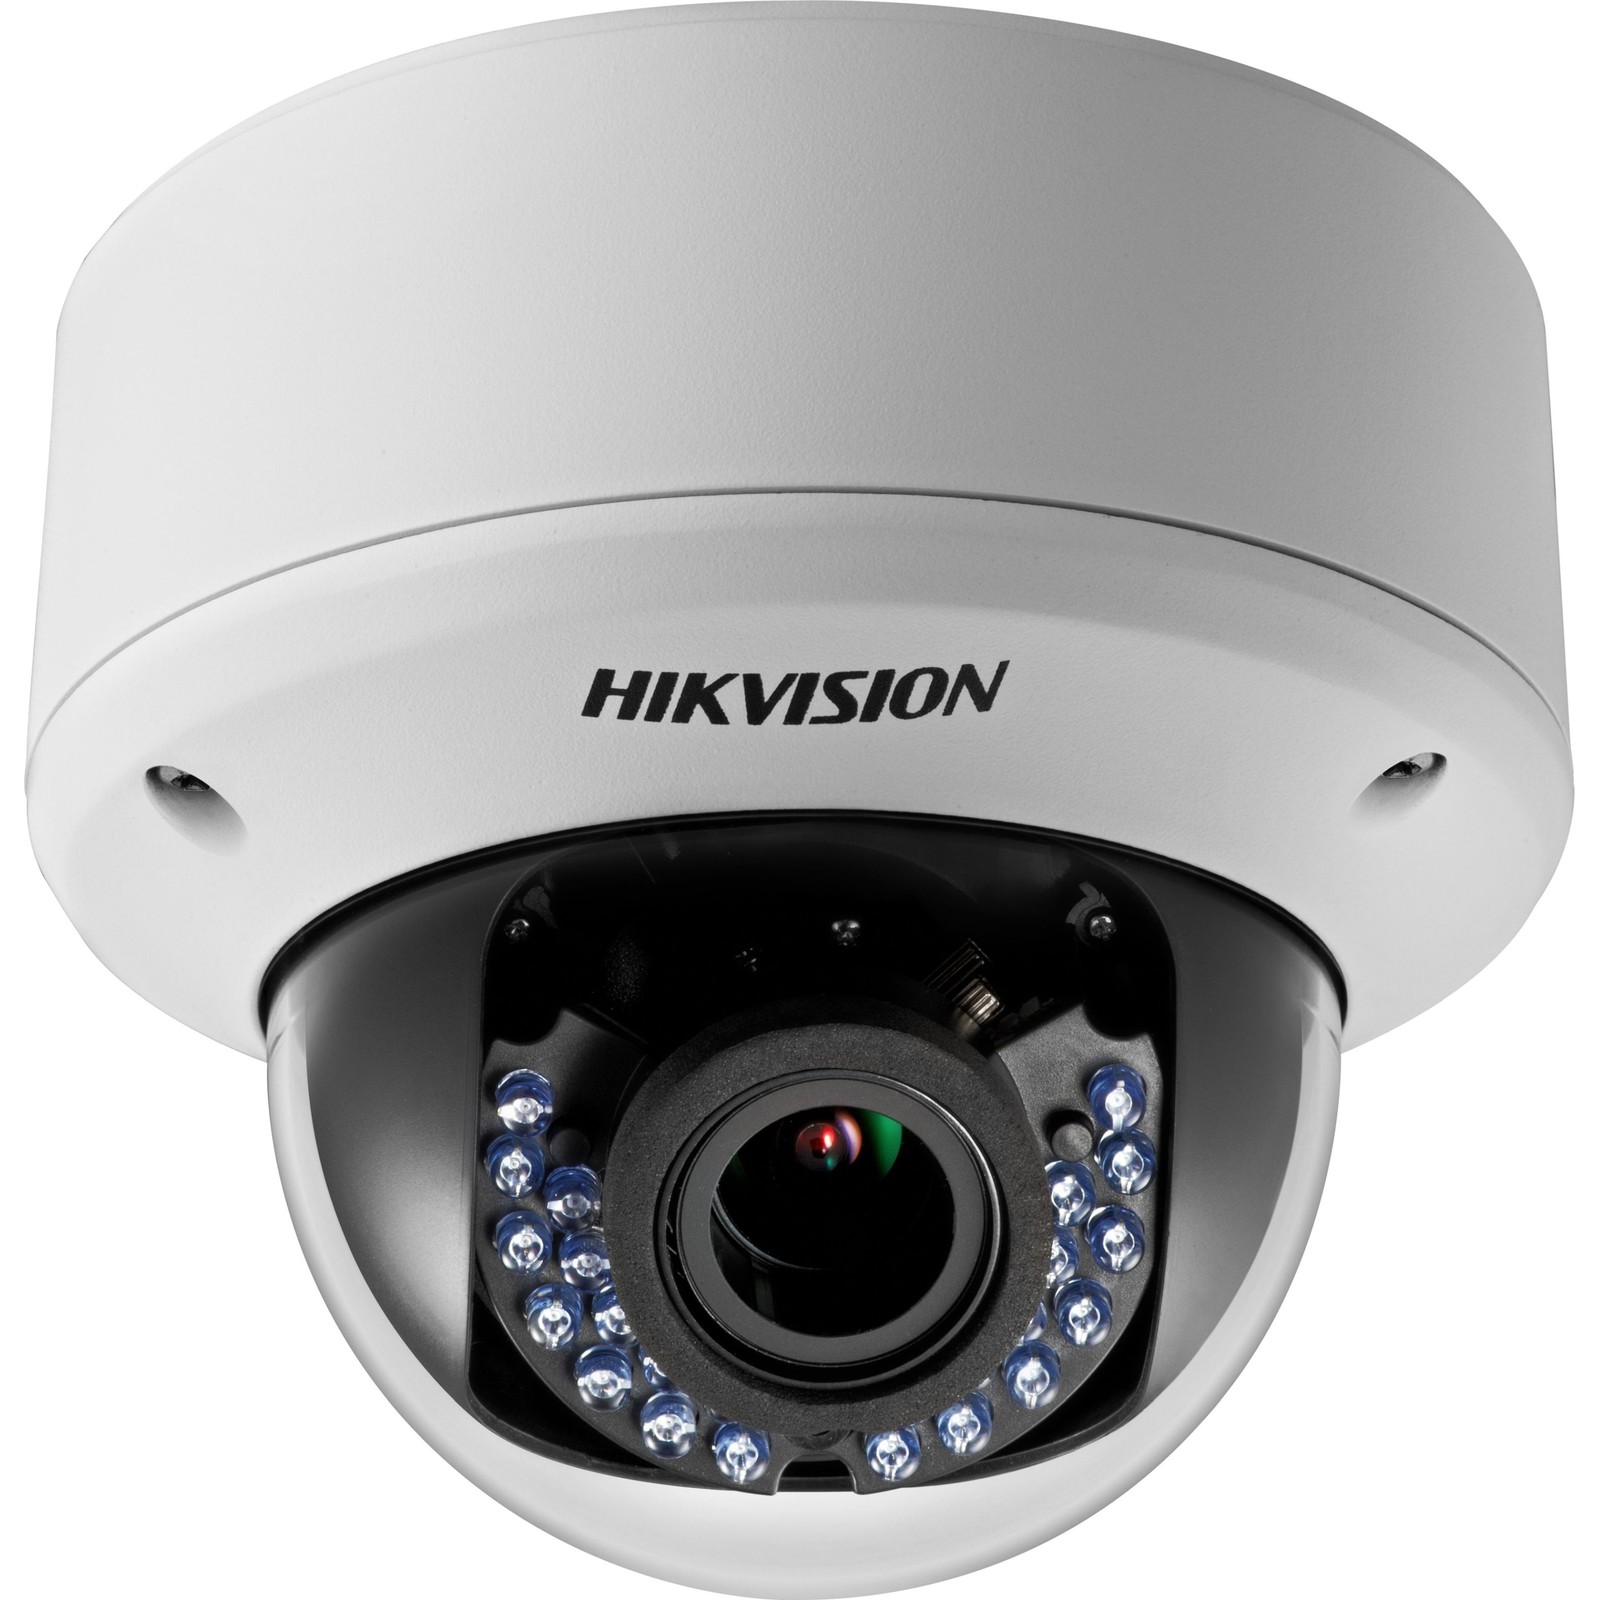 You Recently Viewed Hikvision DS-2CE56D0T-VPIR3E 2MP External Dome Camera Image